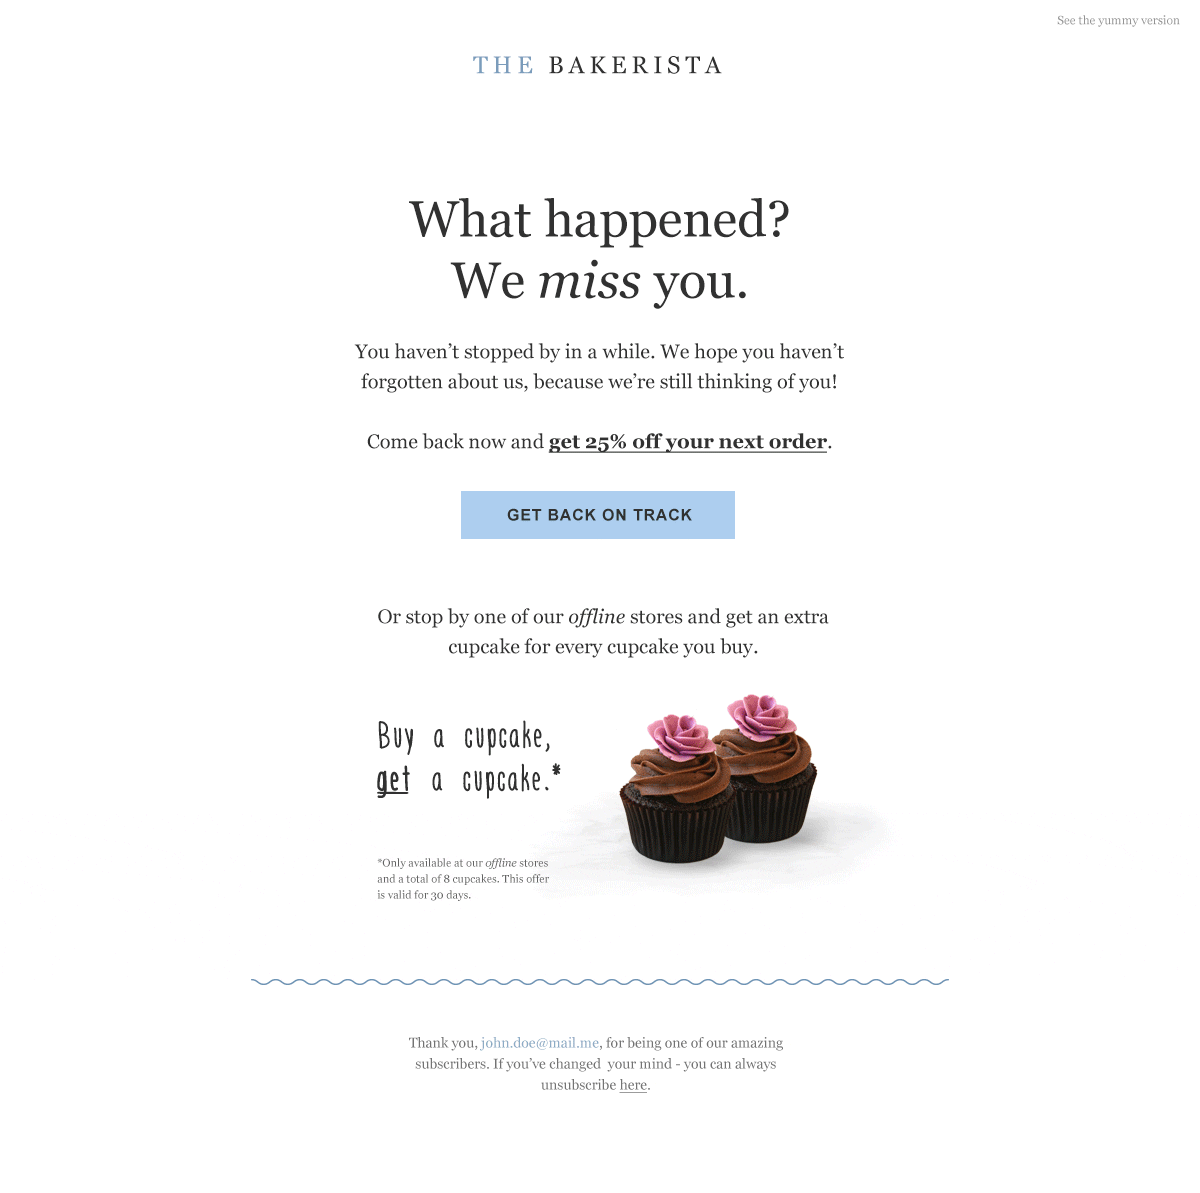 the bakerista cupcakes discount offer win-back email marketing campaign